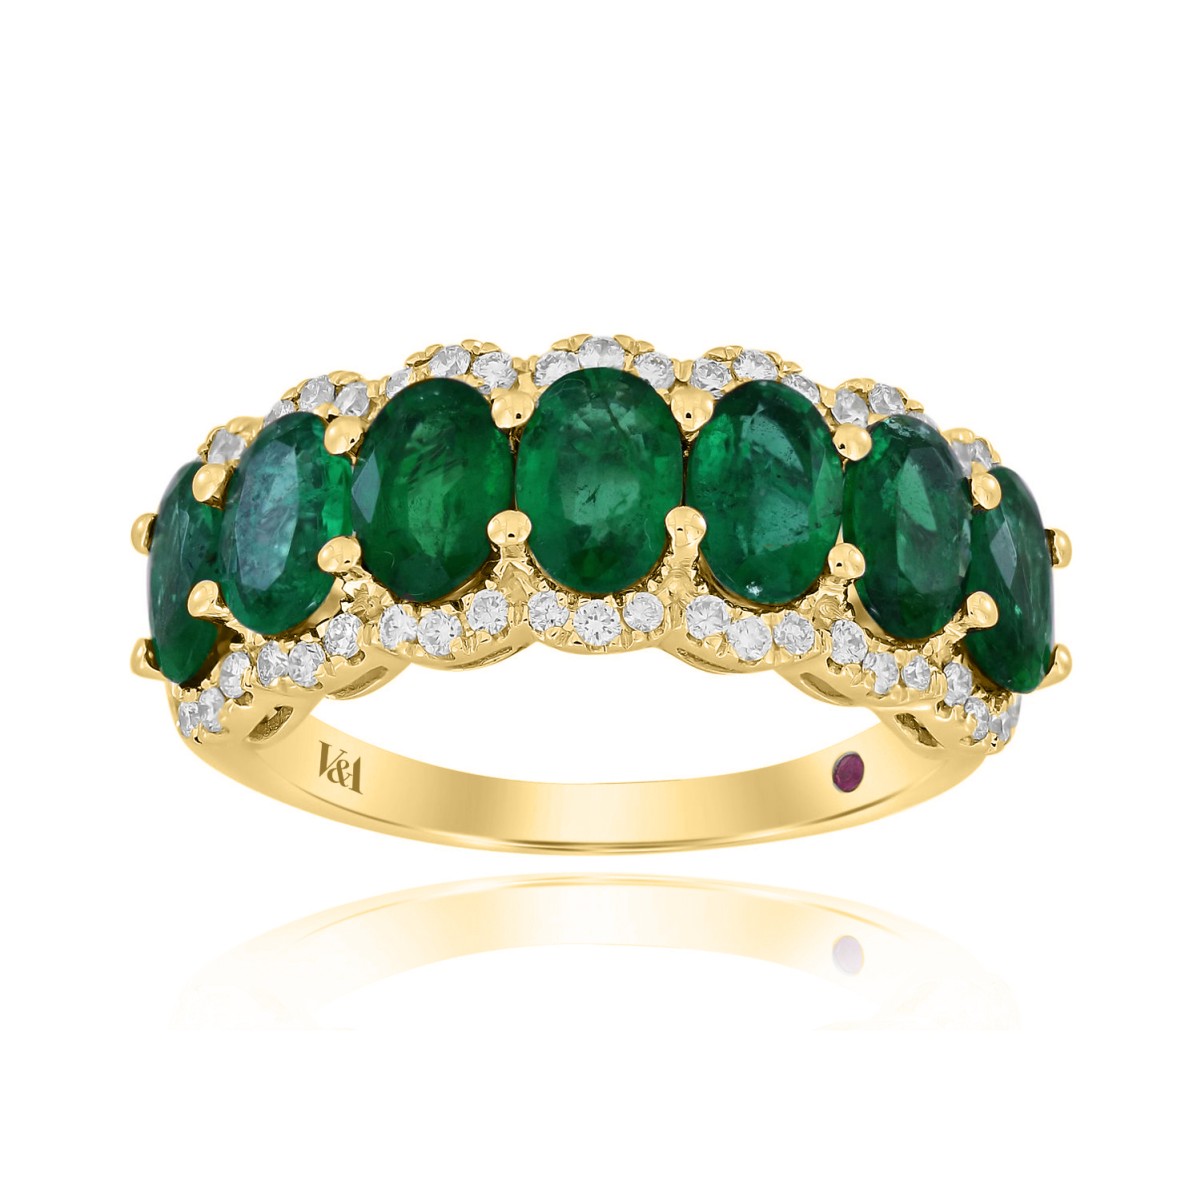 14K YELLOW GOLD 3 1/6CT ROUND/OVAL DIAMOND LADIES BAND(COLOR STONE OVAL GREEN EMERALD DIAMOND 2 3/4CT)